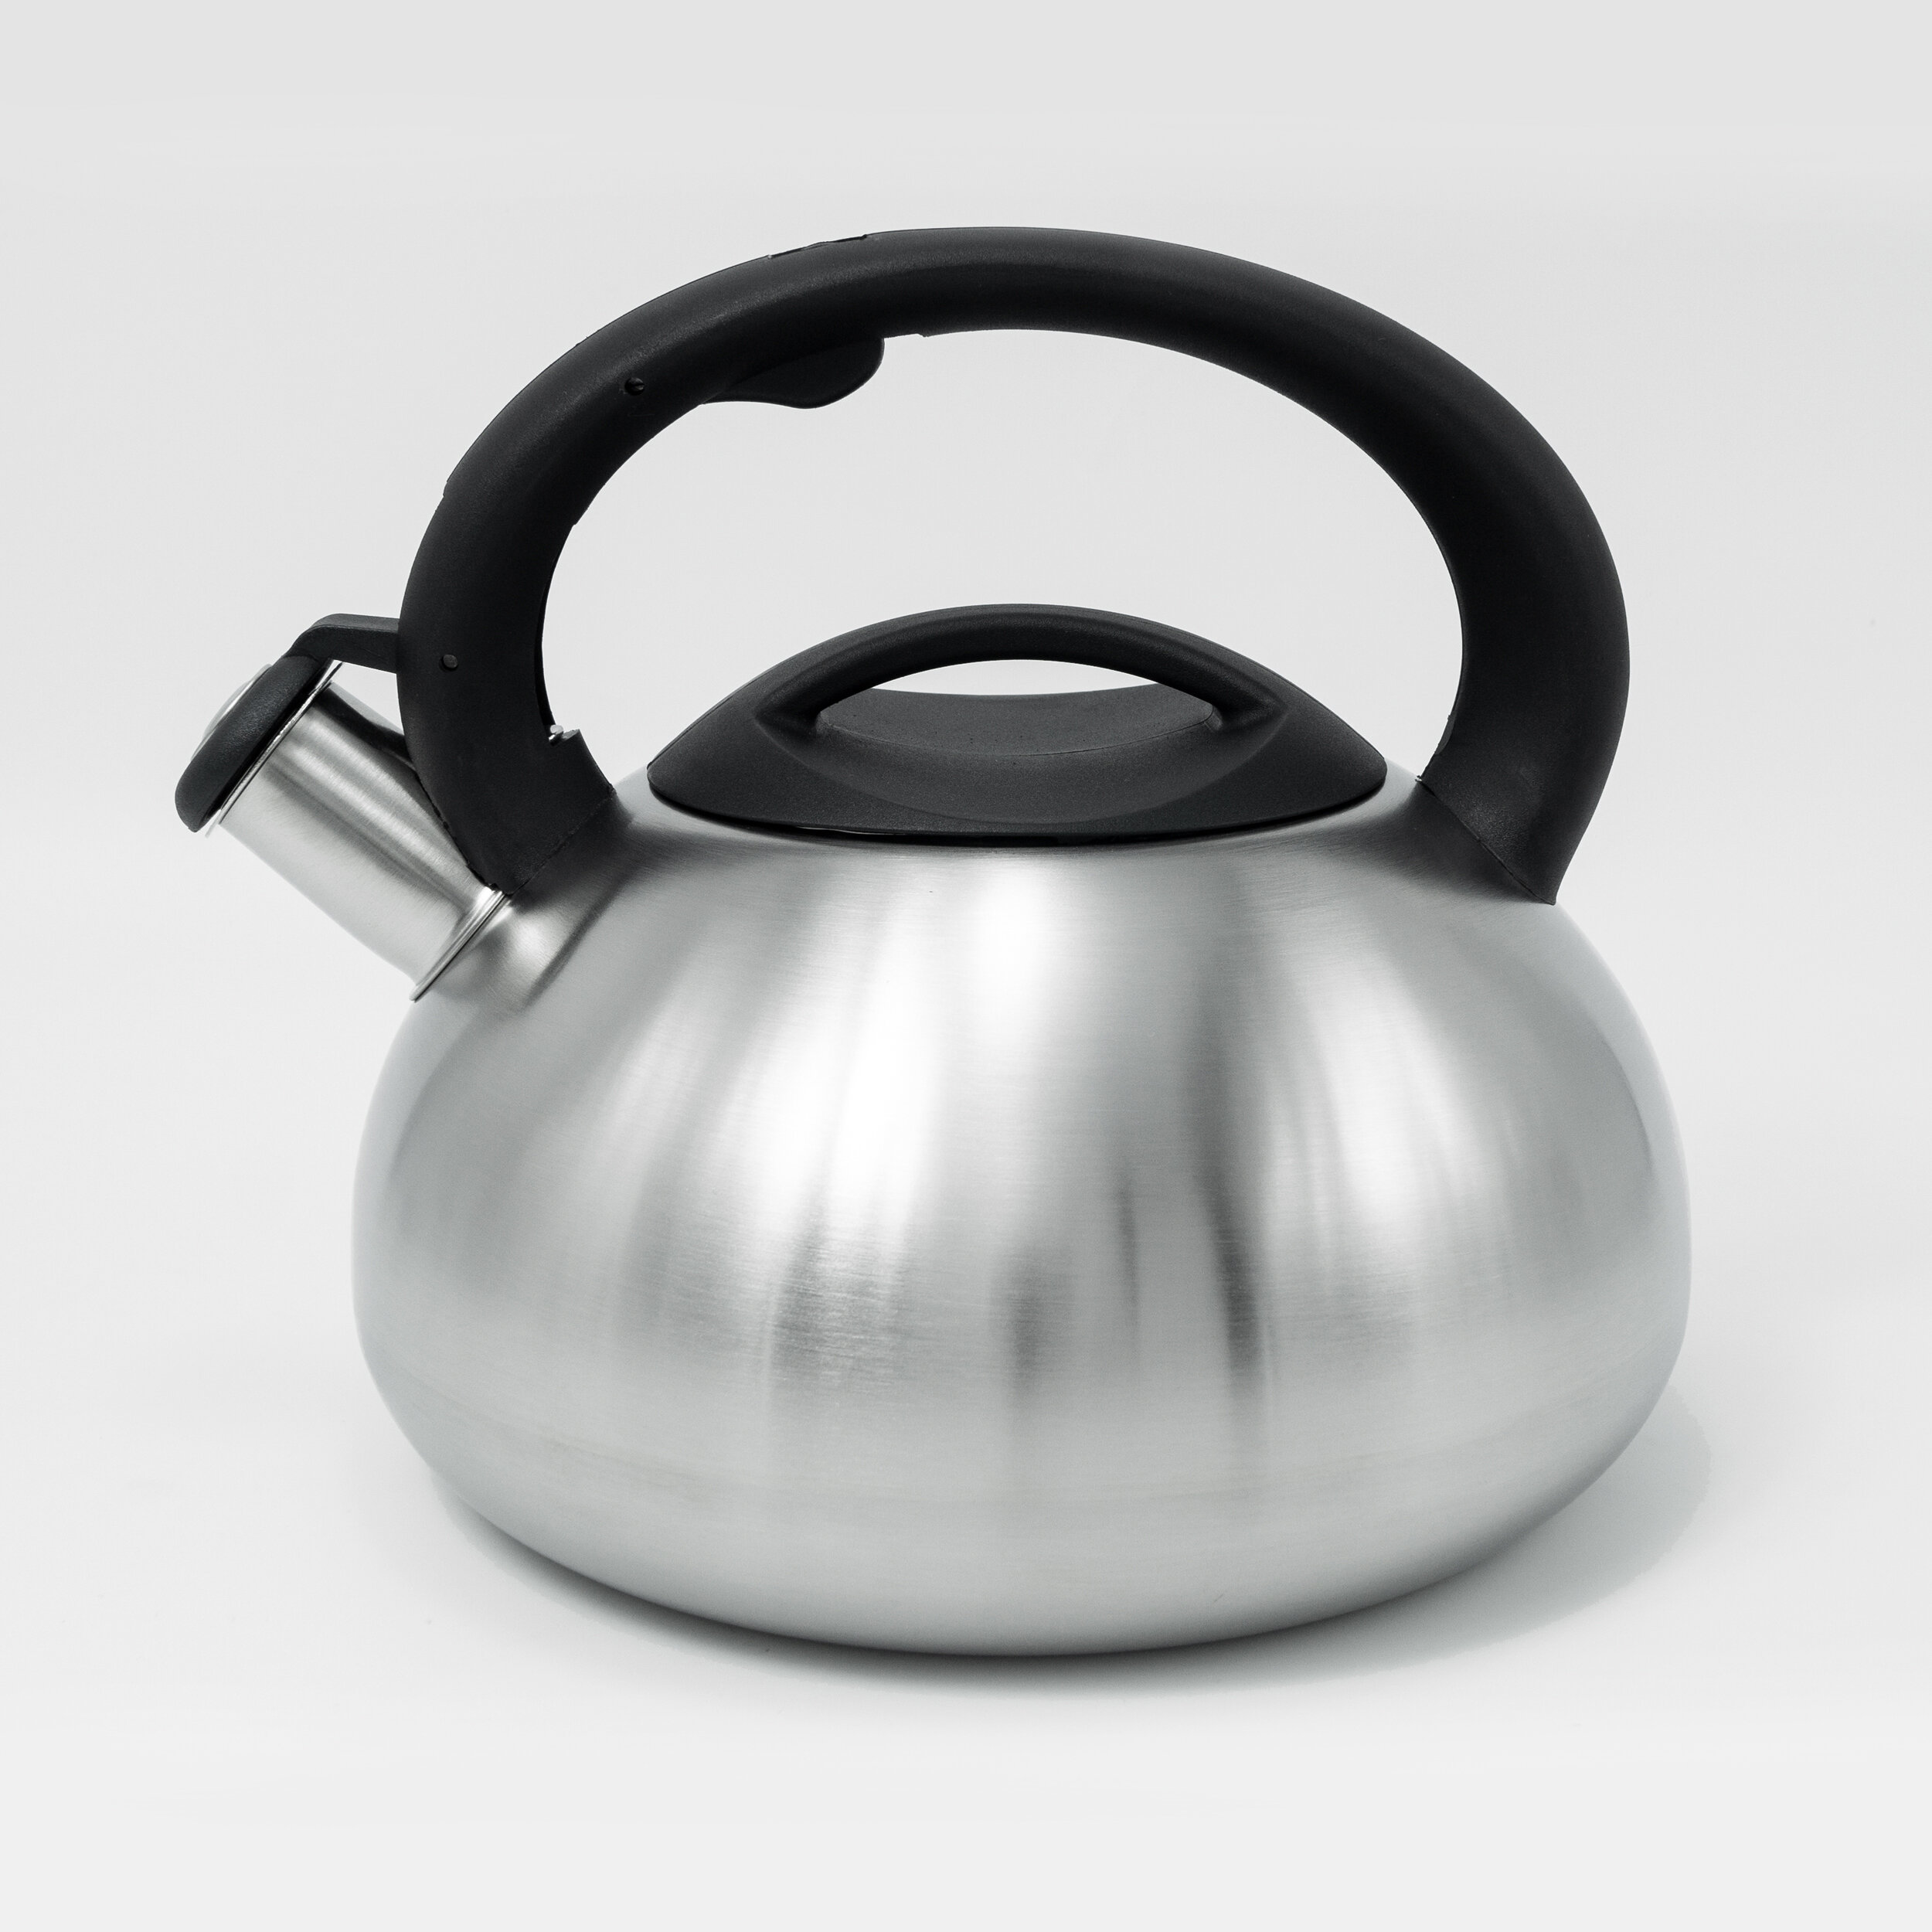 5 1/4 Qt. Stainless Steel Water Kettle Tea Pot This 5 1/4 Qt. Stainless  Steel Water Kettle is 18/10 Stainless Steel The 5 1/4 Qt. Stainless Steel Water  Kettle has a seamless spout and body to prevent leaking.